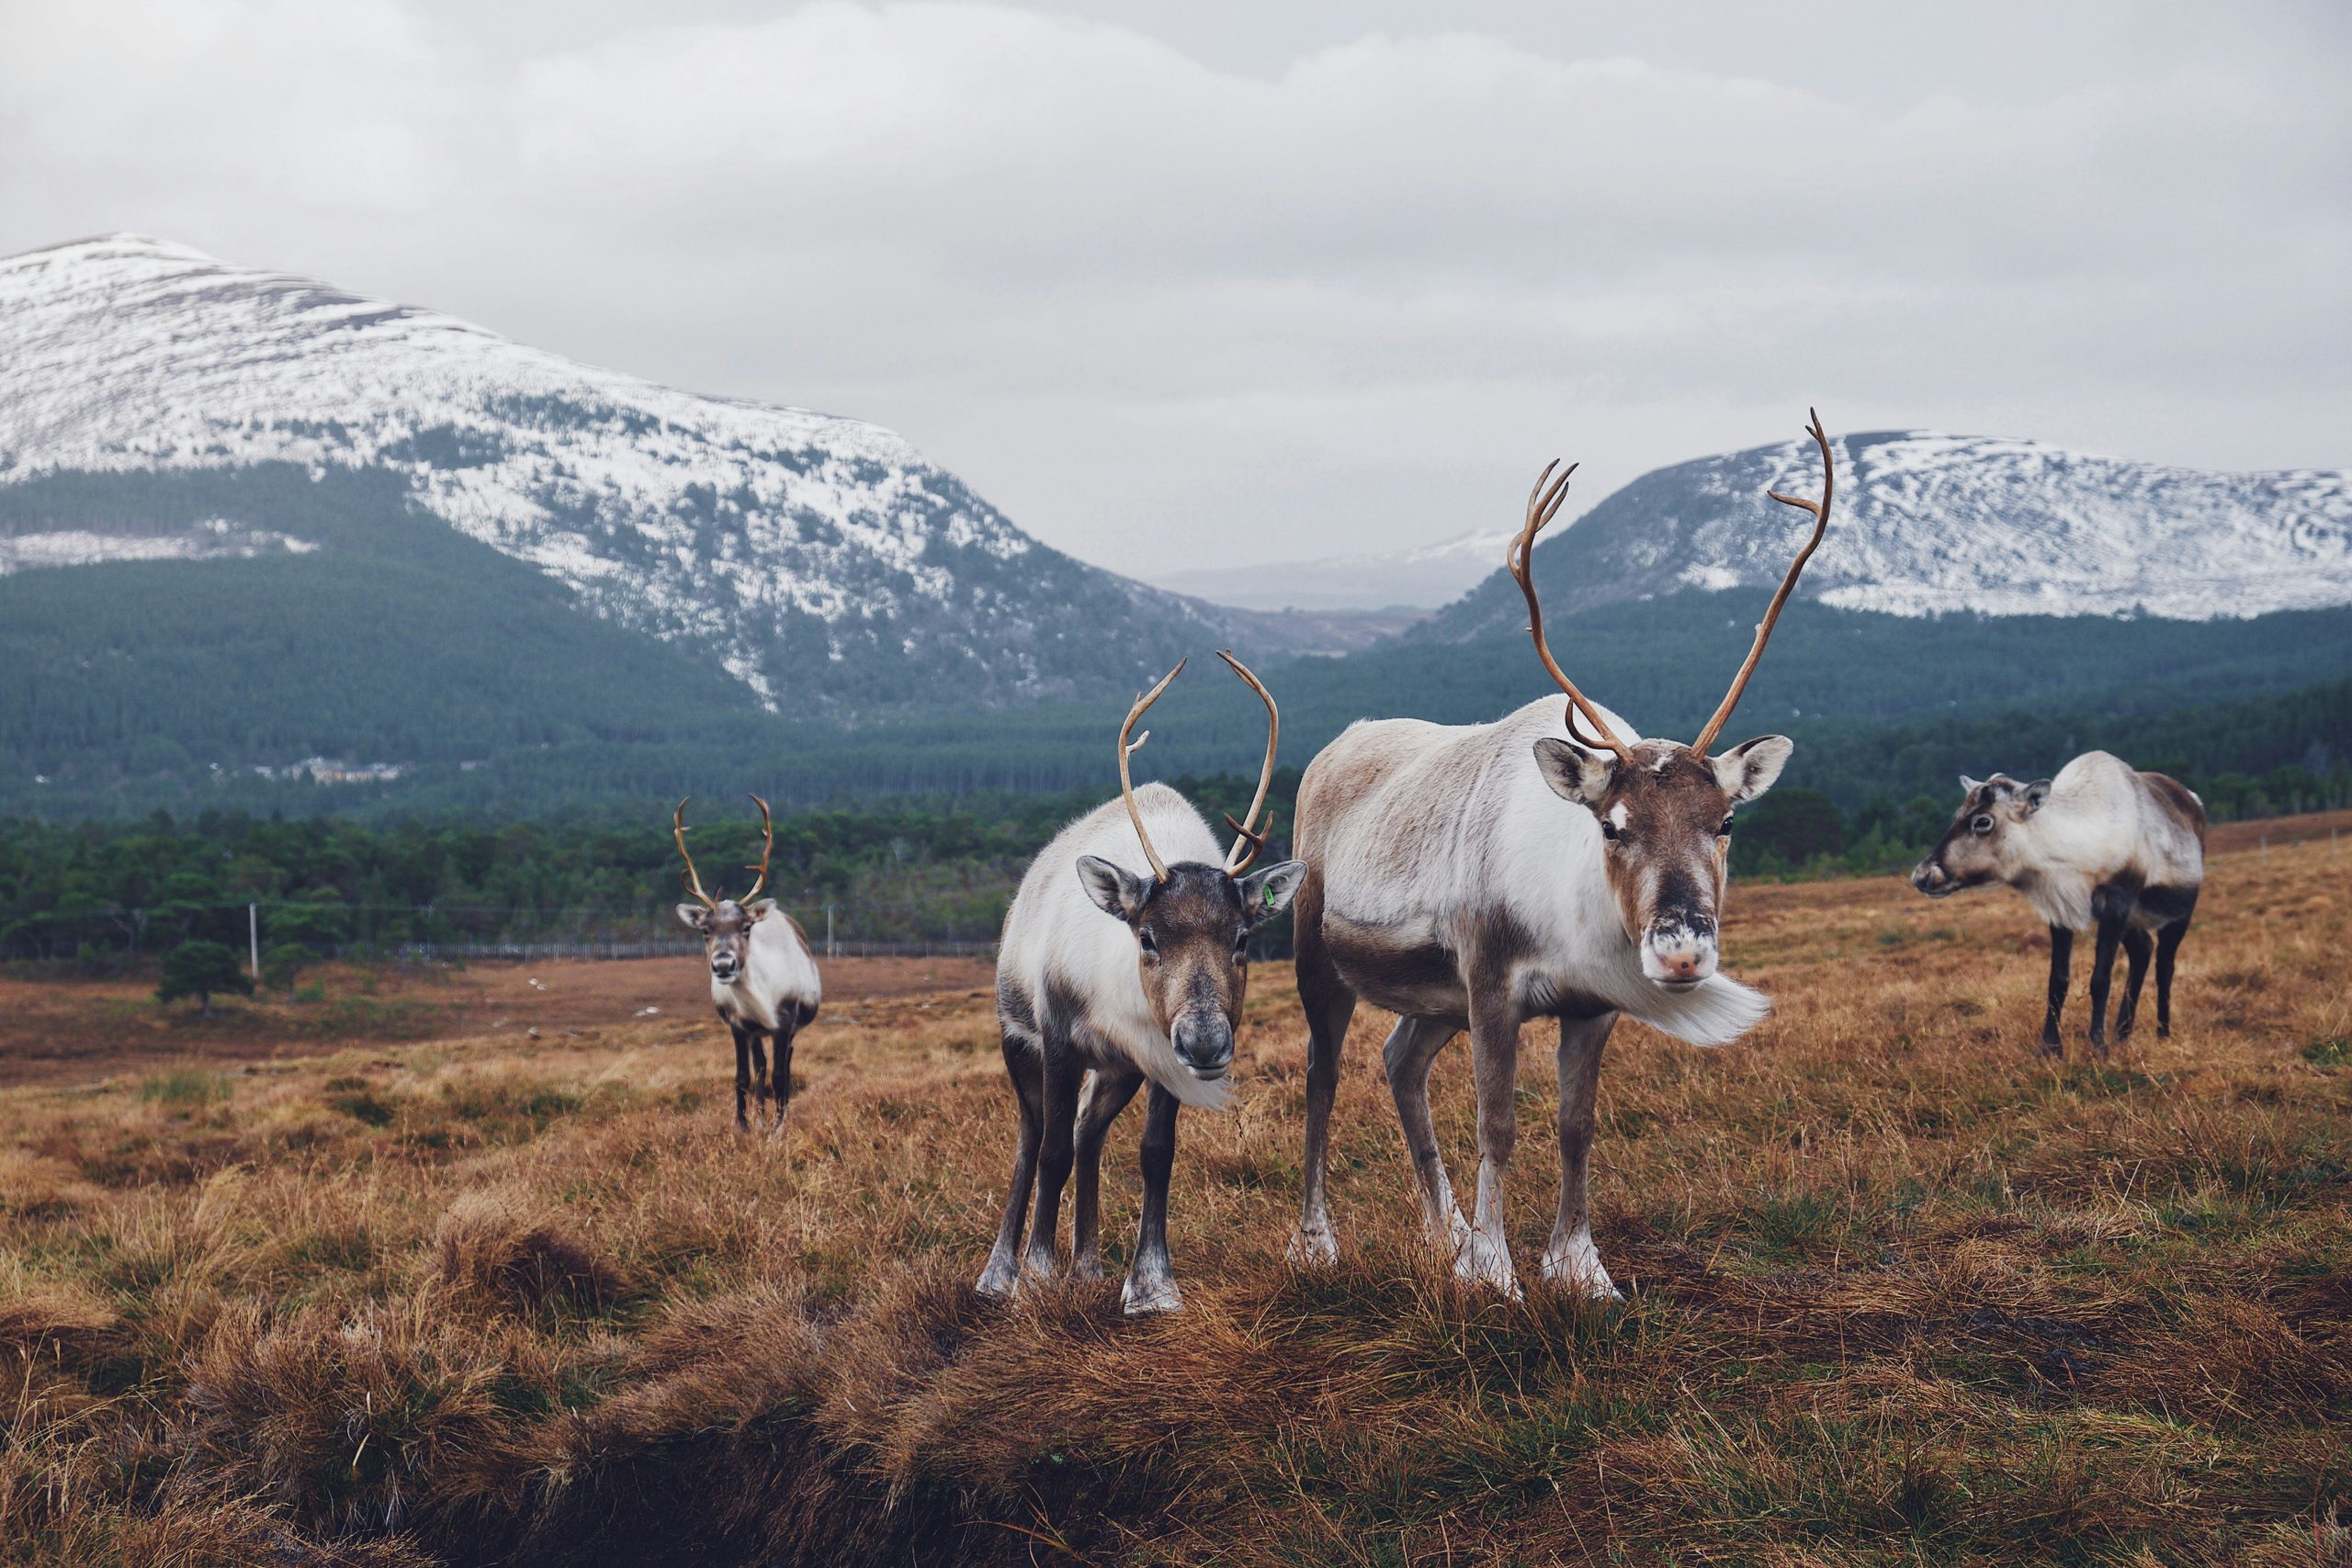 discover the majestic wild reindeer in their natural habitat. learn about their behavior, habitat, and conservation efforts to protect these iconic animals.